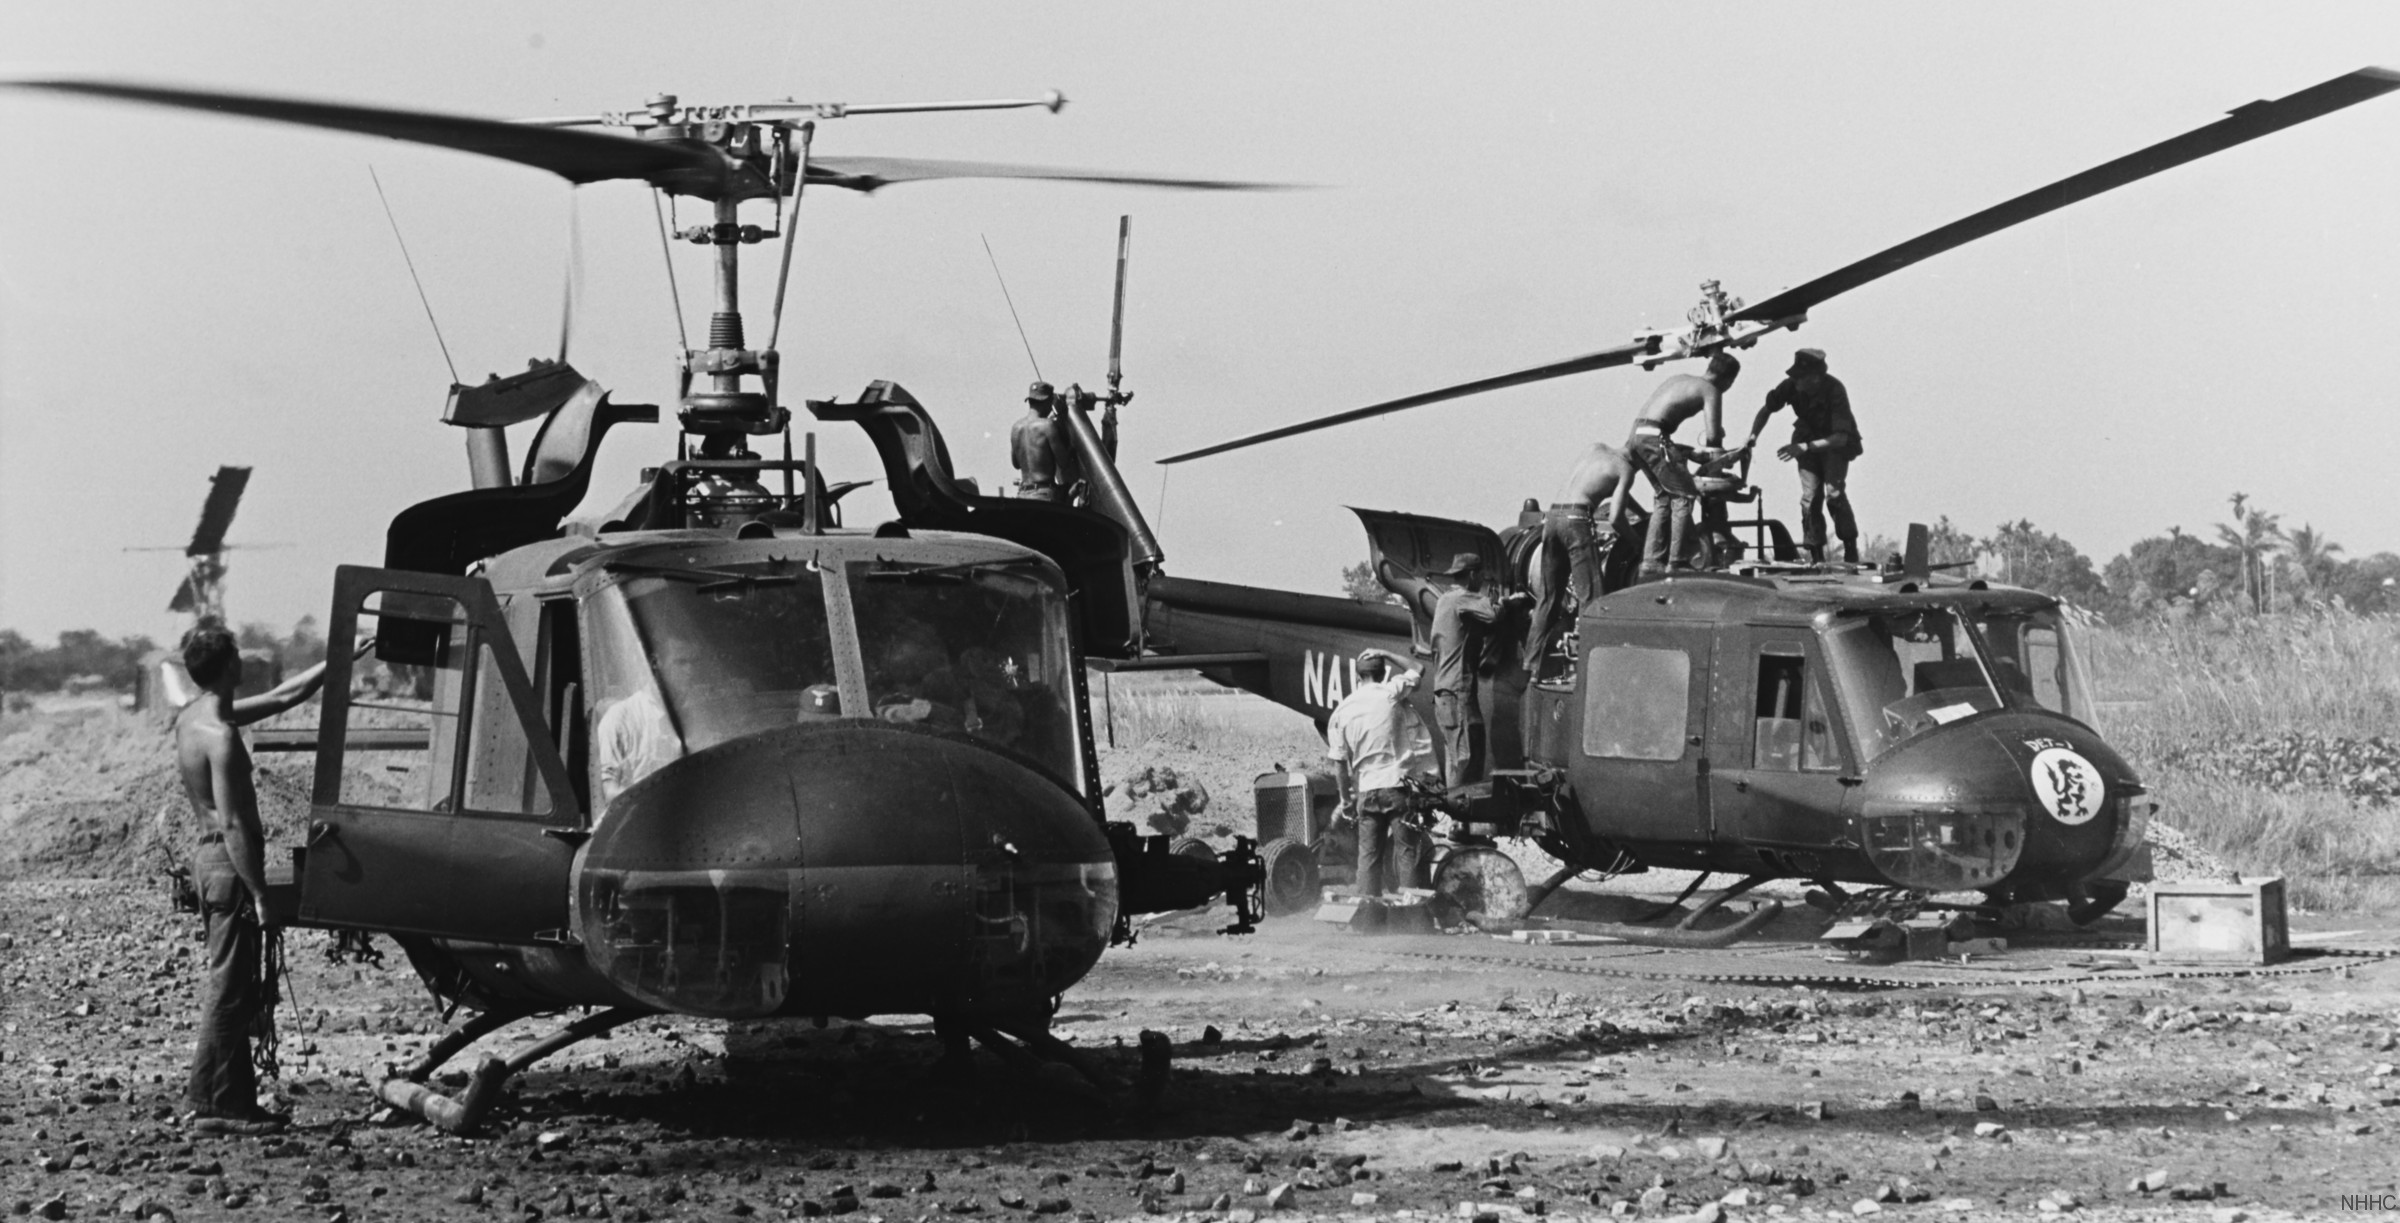 hal-3 seawolves helicopter attack squadron light us navy uh-1 huey 15